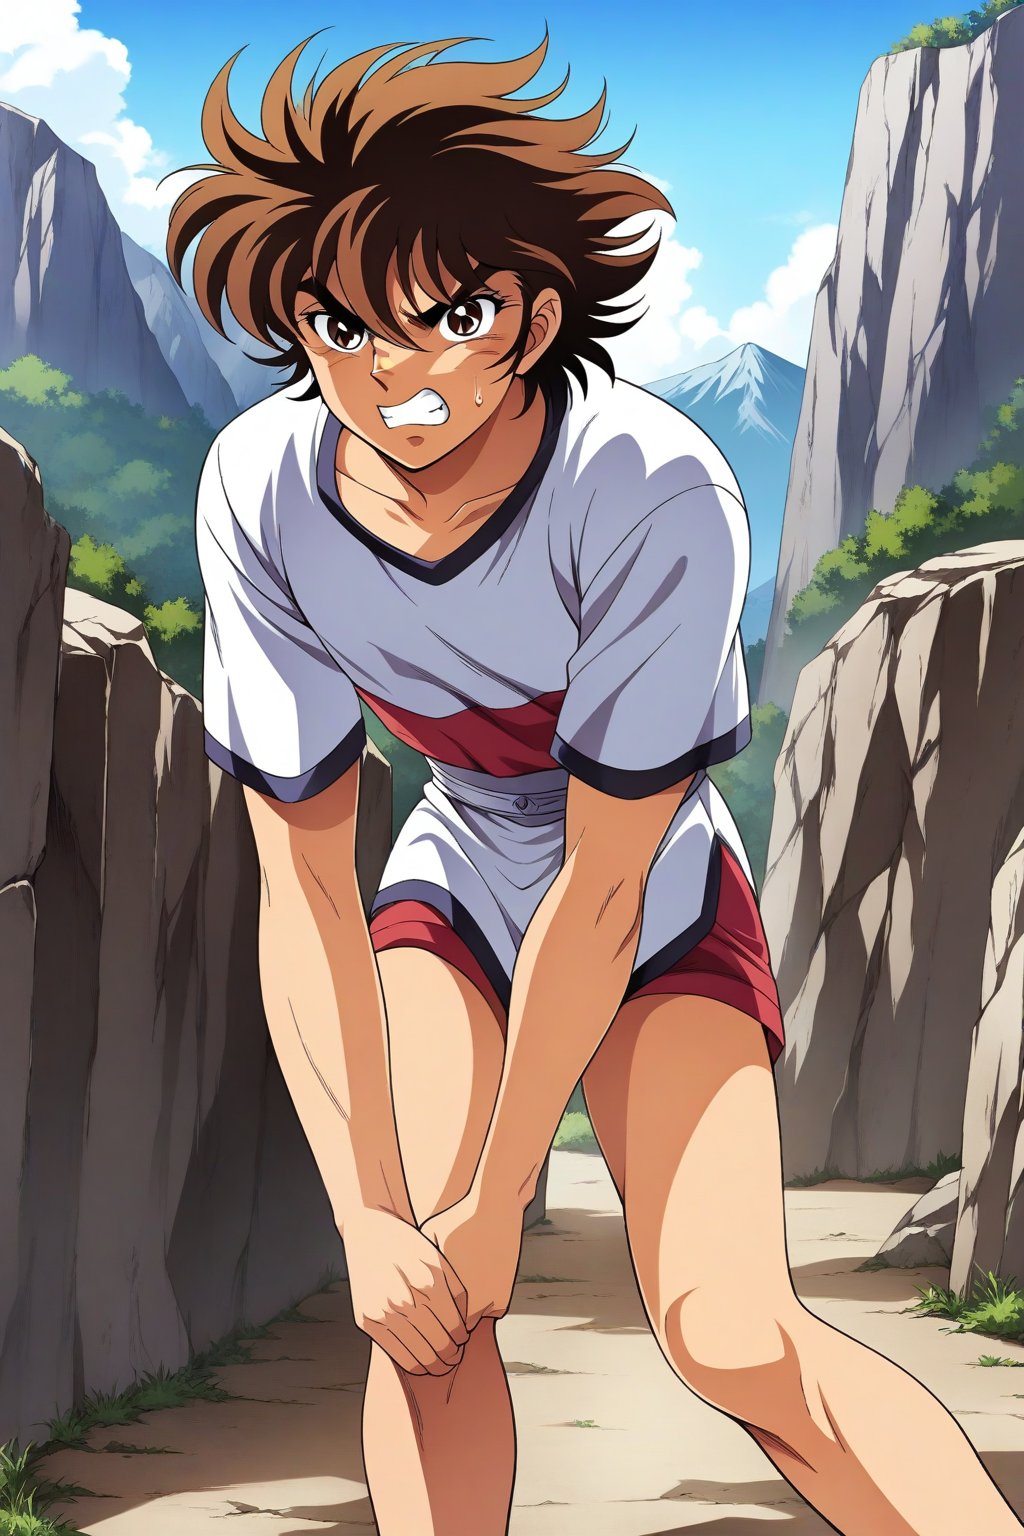 (masterpiece, best quality, ultra HD anime quality, super high resolution, 1980s/(style), retro, anatomically accurate, perfect anatomy), (side view, bottom angle), looking at the camera, (Seiya Pegasus, male), 1 male, solo, brown hair, short hair, bangs between eyes, messy hair, brown eyes, angry face, cut on cheek), heavy breathing, excited, (Pegasus cross), (poised, low body position, legs wide apart, one foot forward), (mountain scenery, mountain path, barren land, large rocks, cliff), score_9, score_8_up, score_7_up, score_6_up